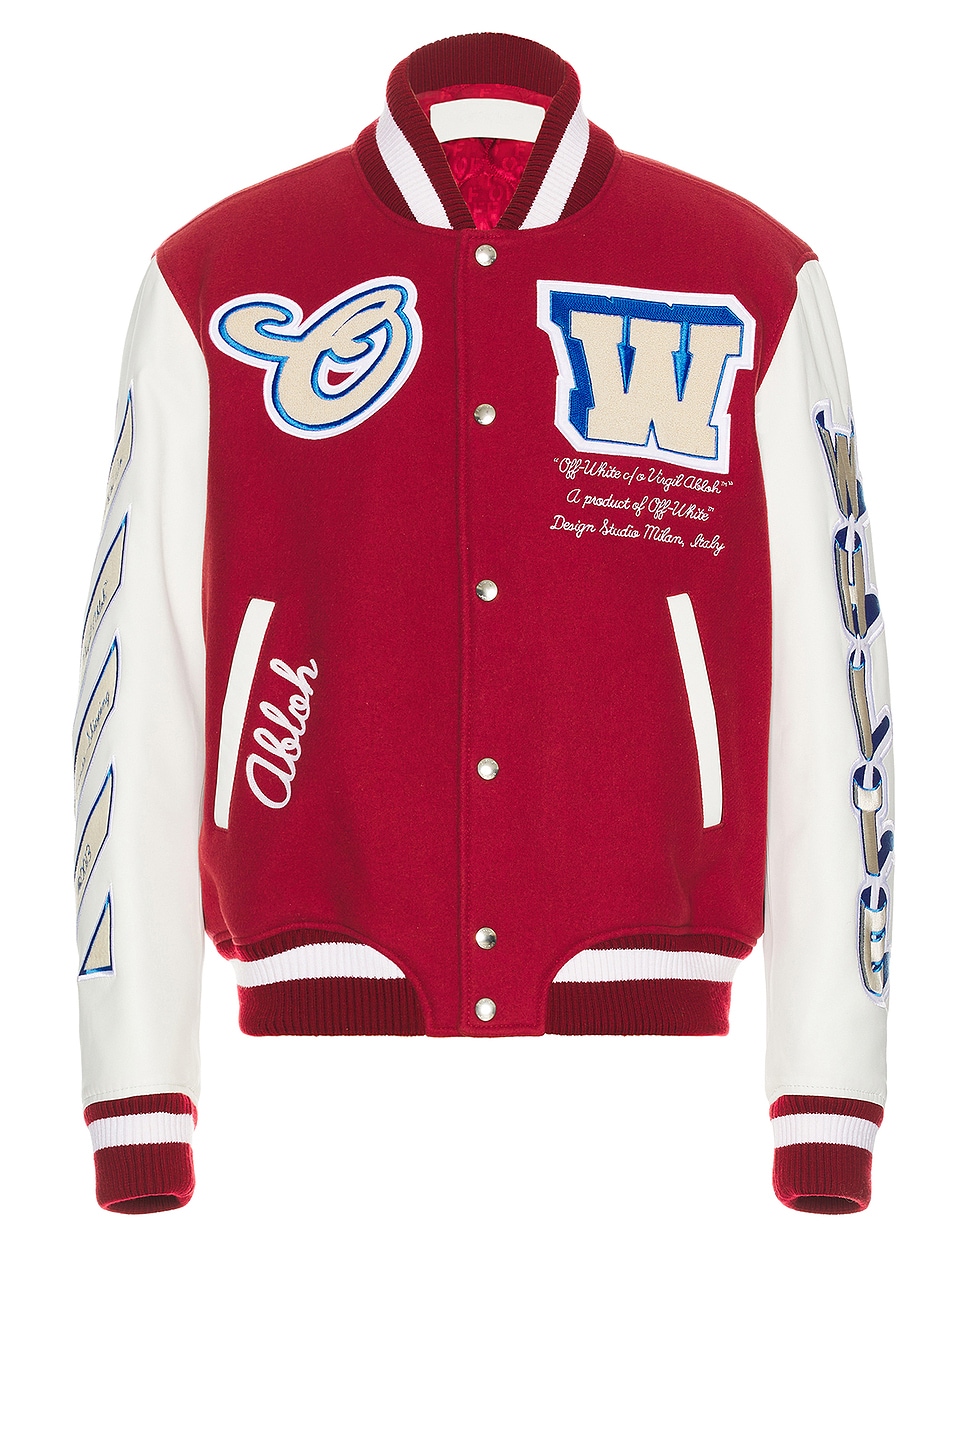 OFF-WHITE On The Go Leather Sleeve Varsity Jacket in Red & Off White | FWRD